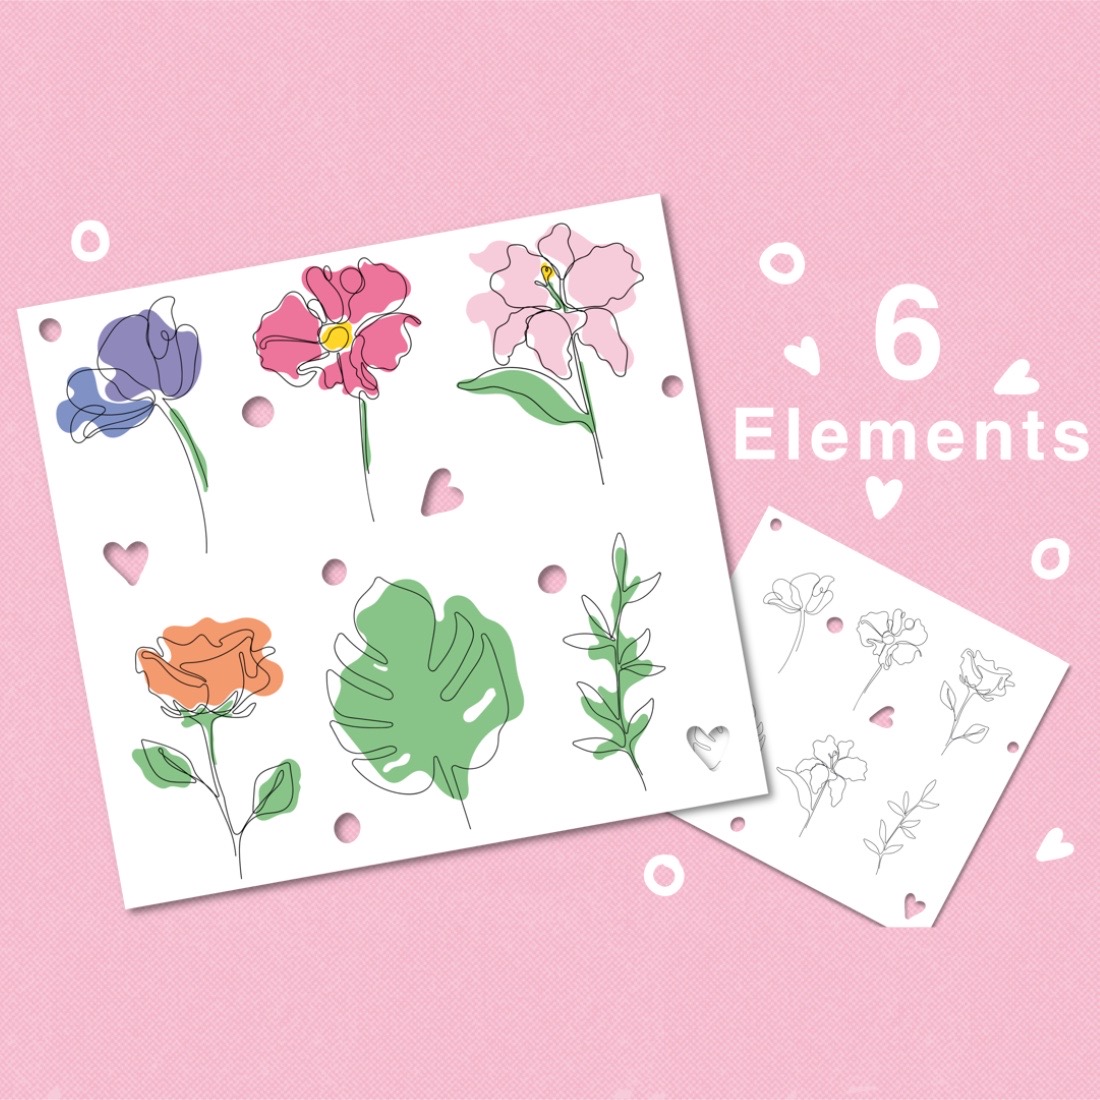 Flowers - One Line Art Clipart Stickers elements.